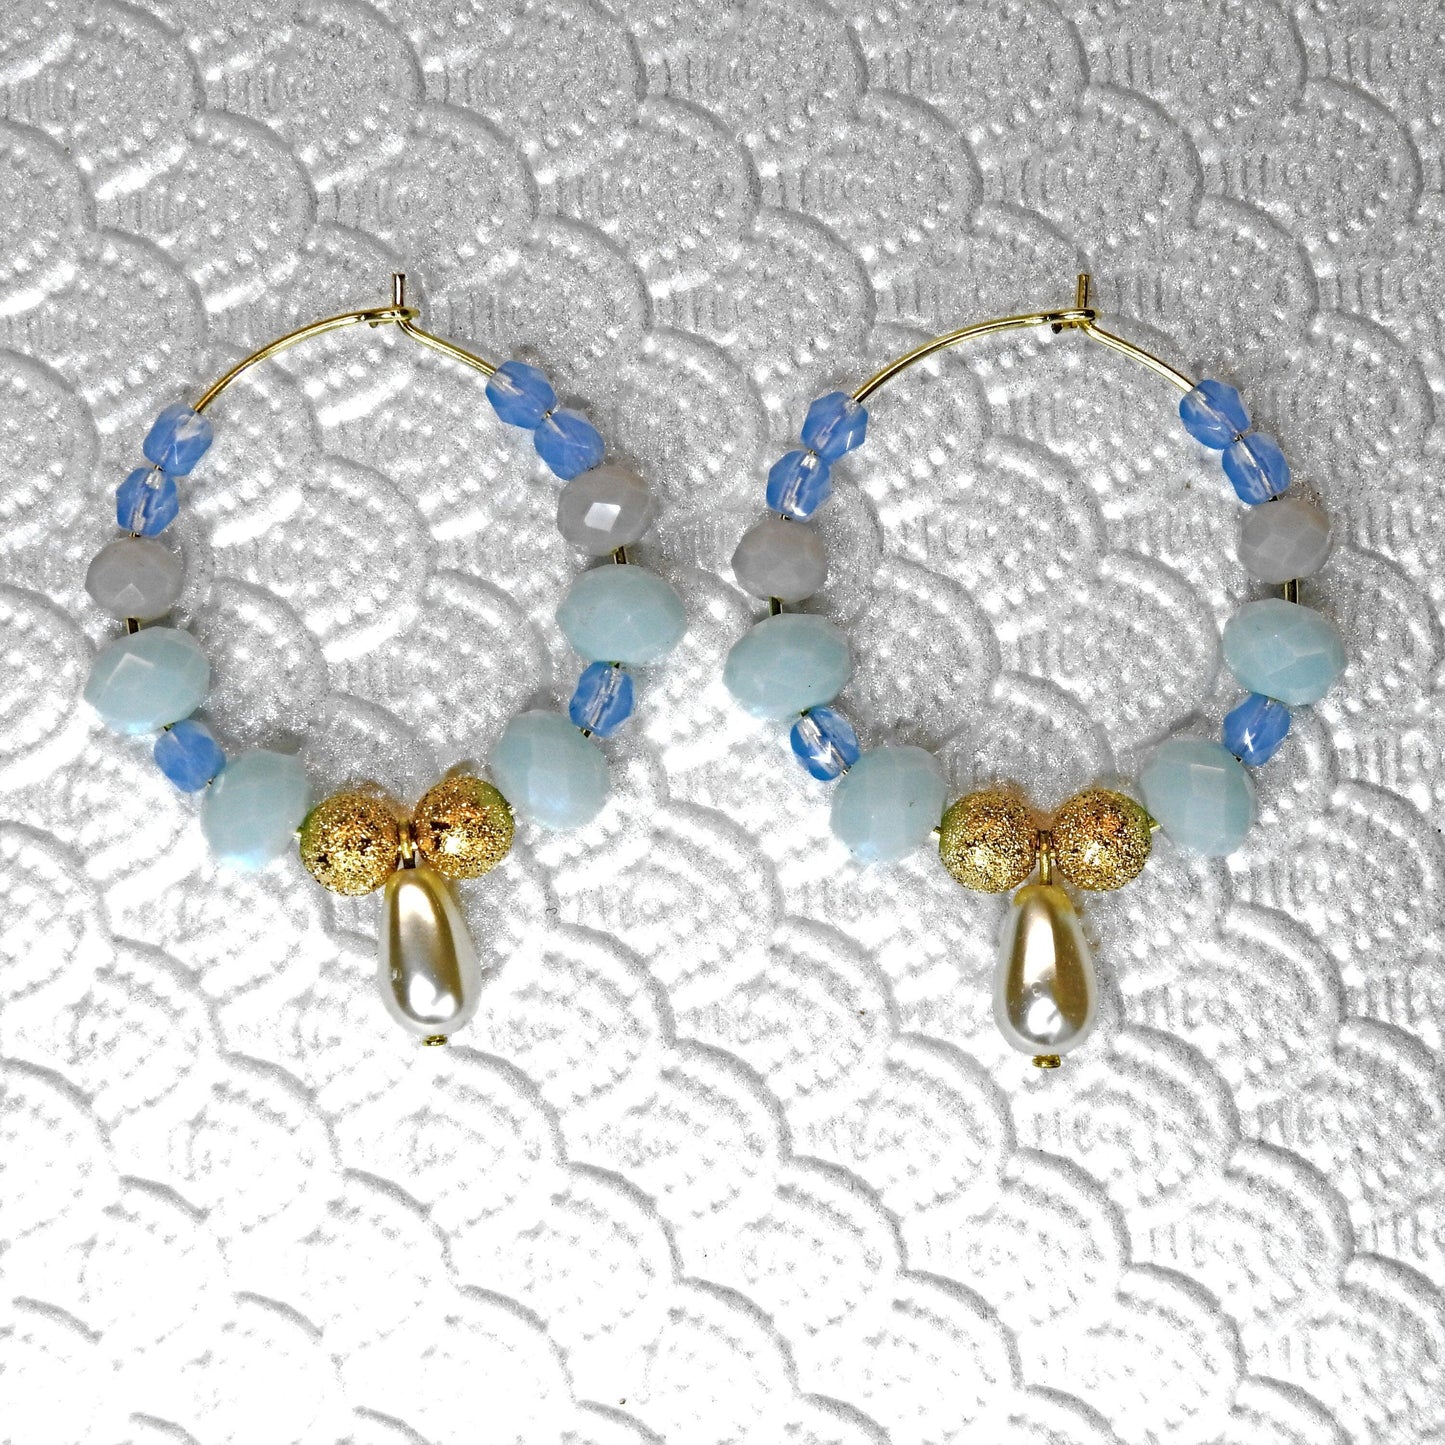 Aqua blue hoops earrings with a cute pearl drop charms. Pretty multi colored gifts ideas for women. Party earrings 30 mm 1.5''